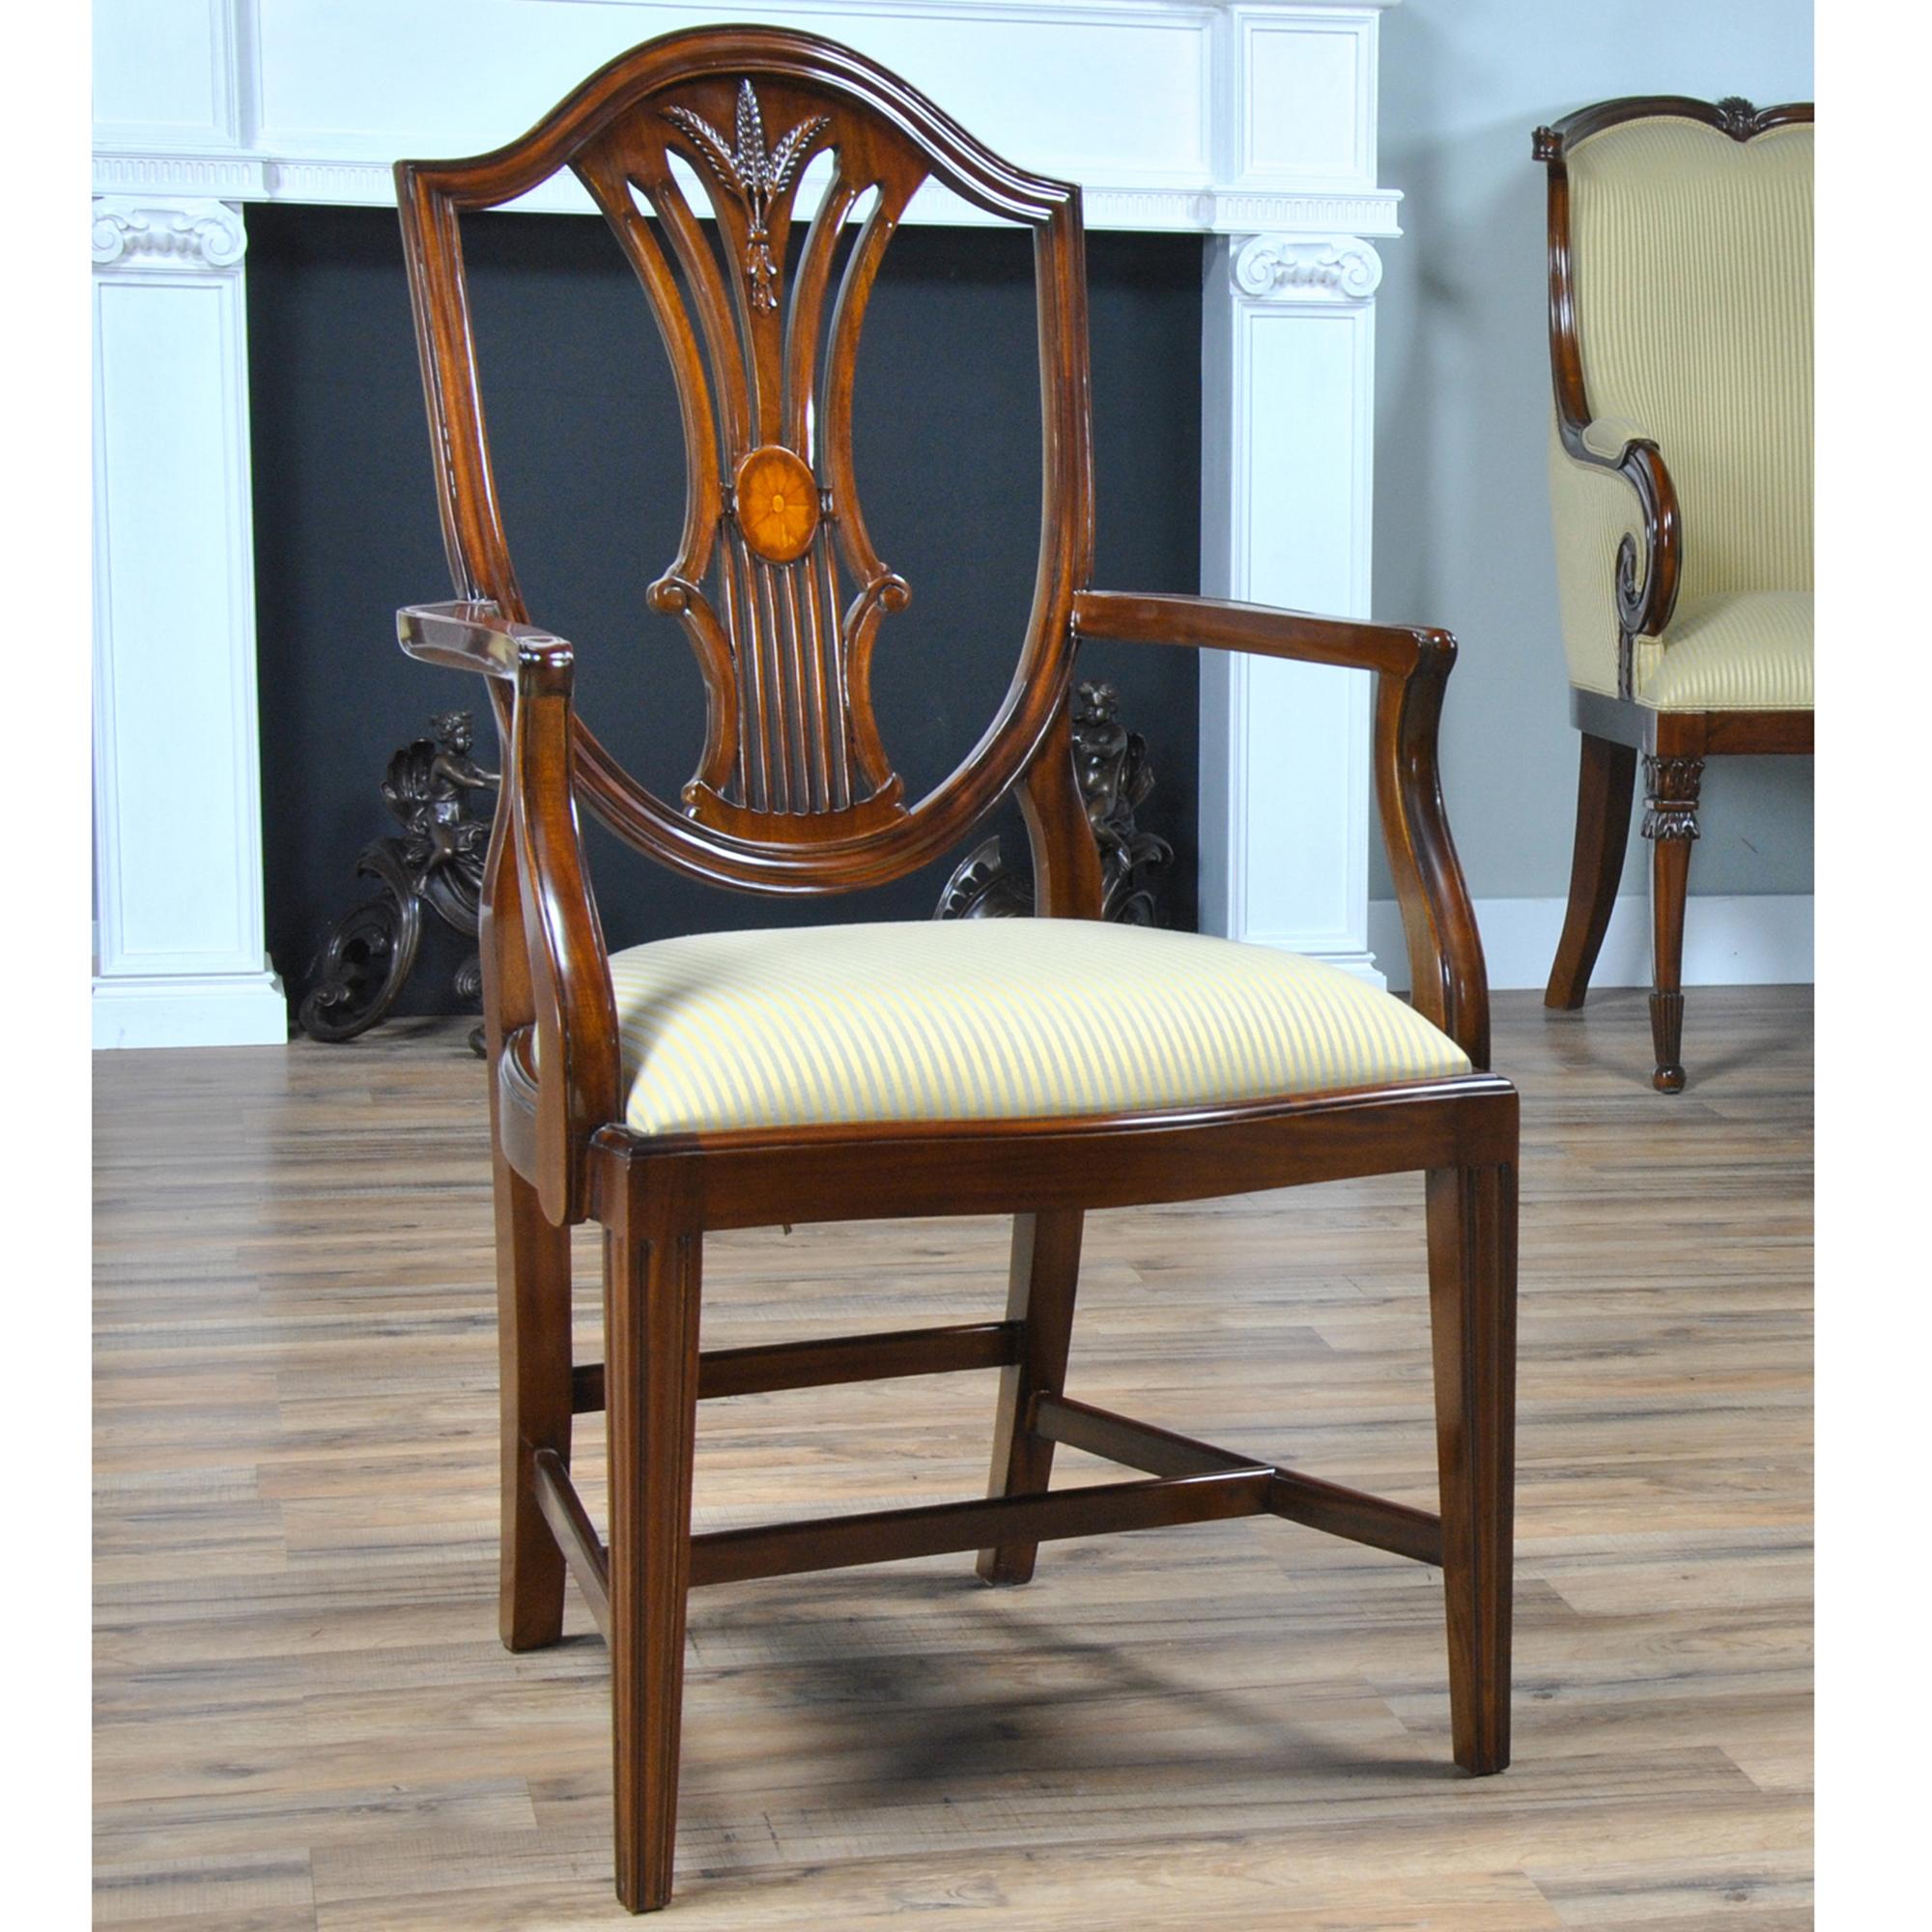 This set of 10 Inlaid Shield Back Chairs features 2 arm chairs and 8 side chairs. These shield back chairs are taller than many traditional shield back design chairs allowing the homeowner to see the beautiful workmanship in the chair backs even